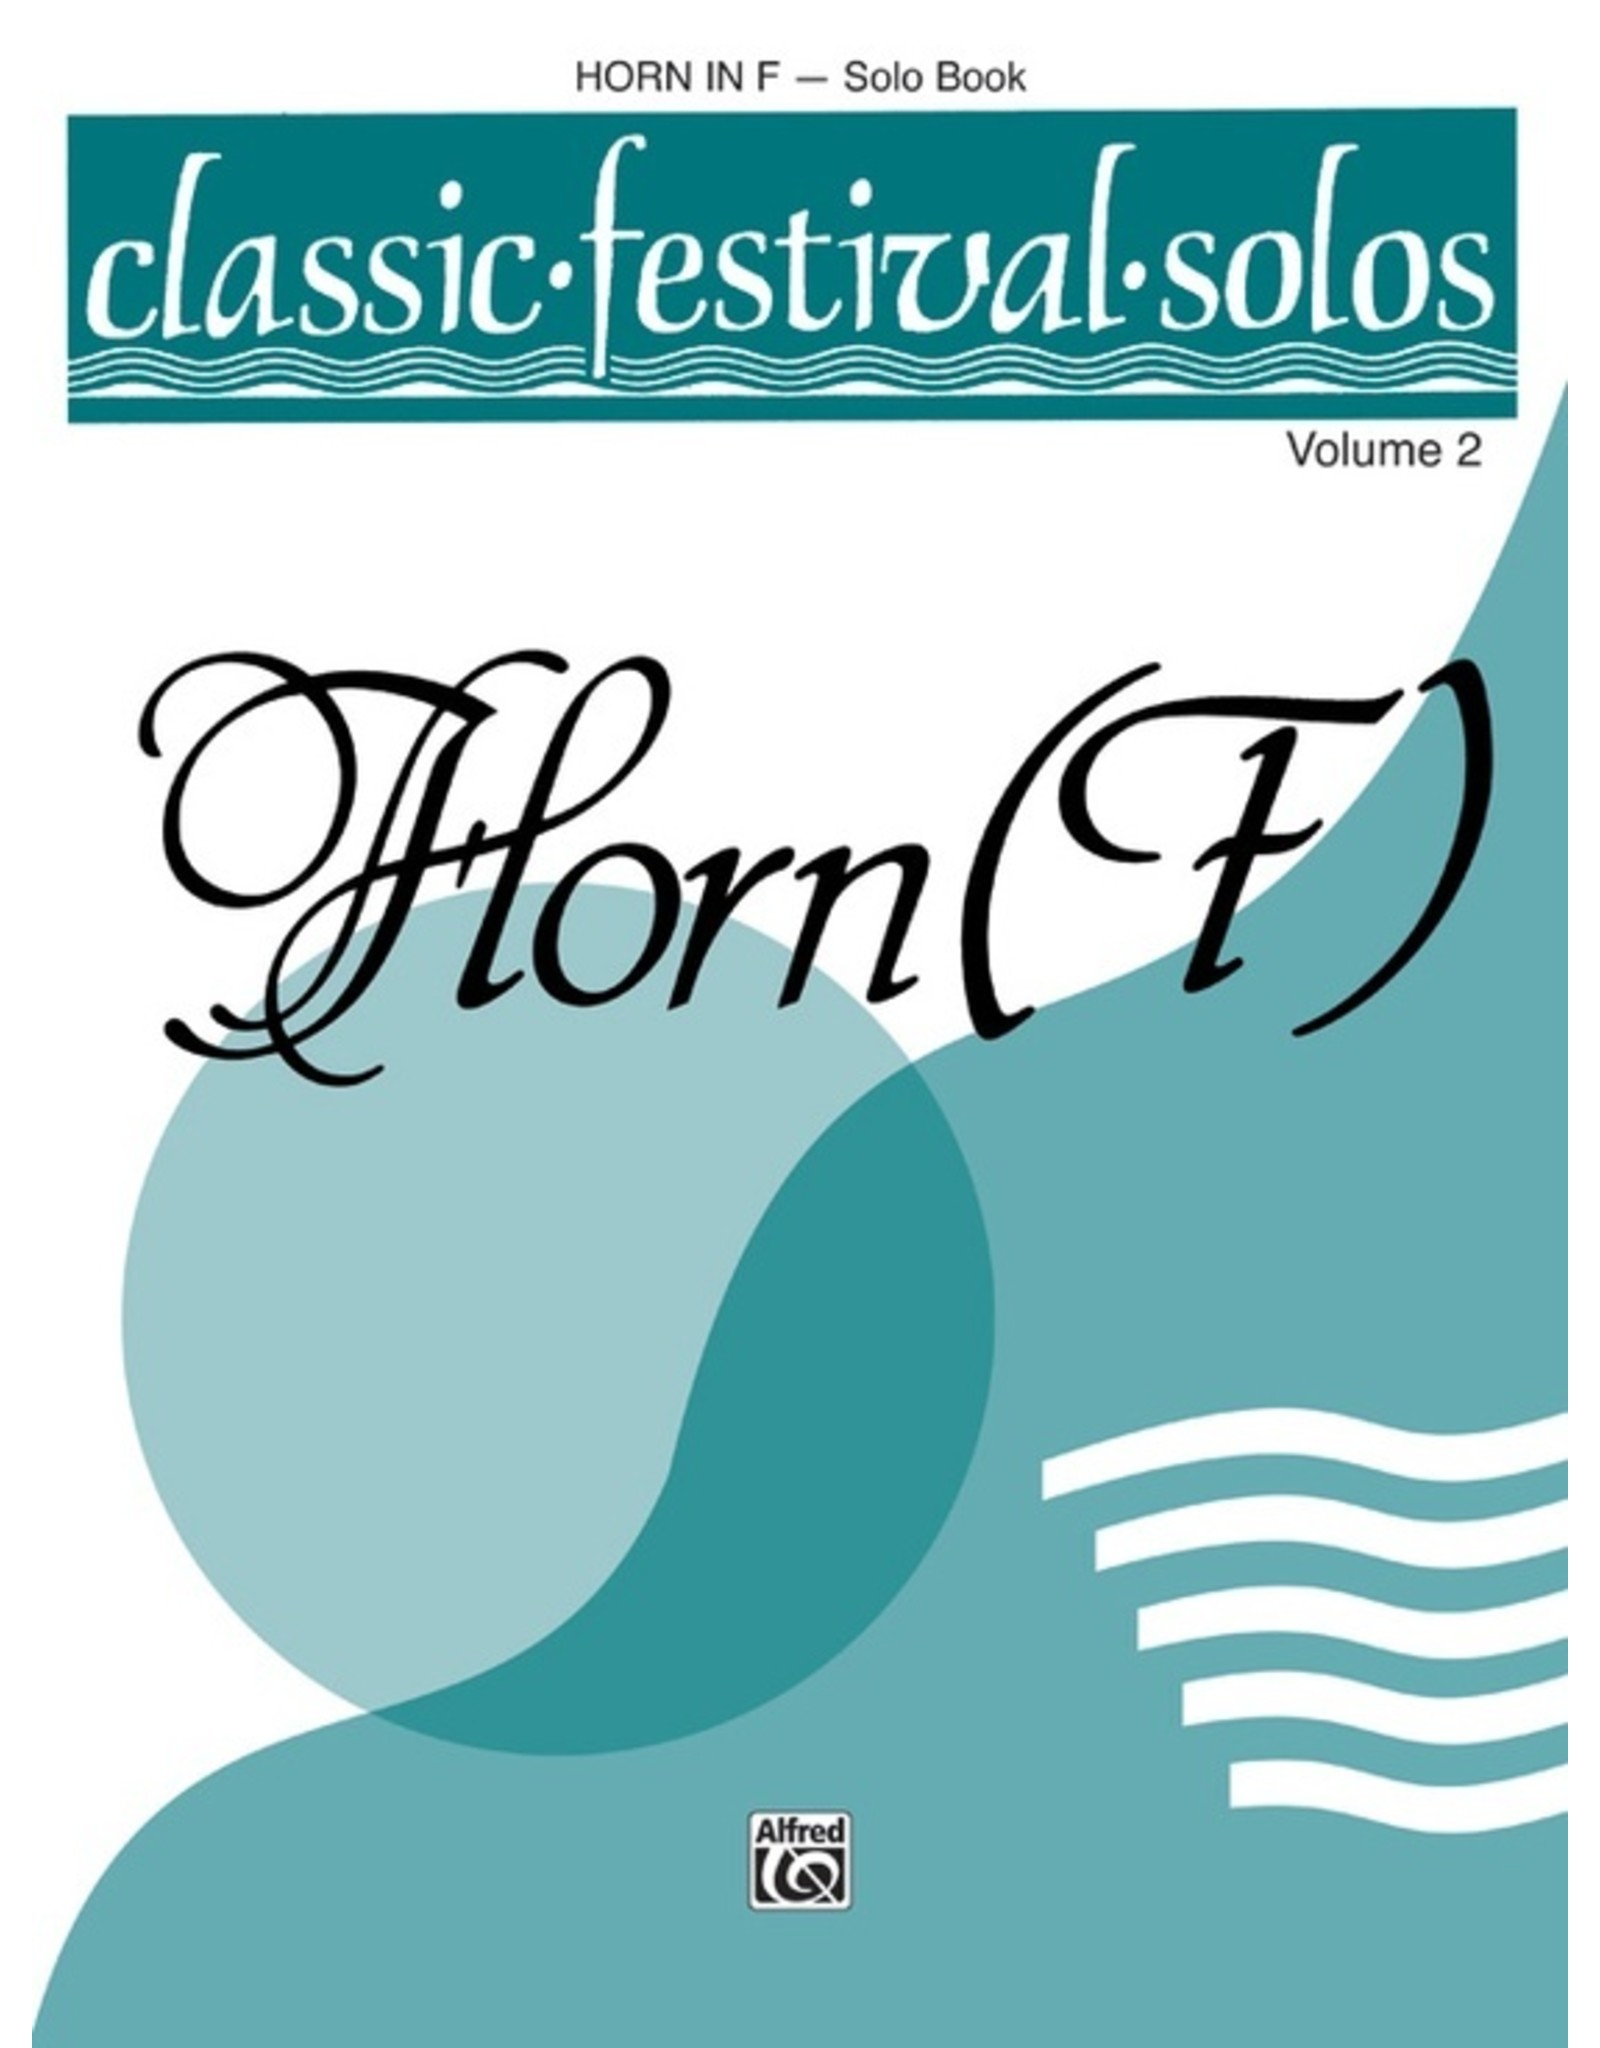 Alfred Classic Festival Solos (Horn in F), Volume 2 Solo Book